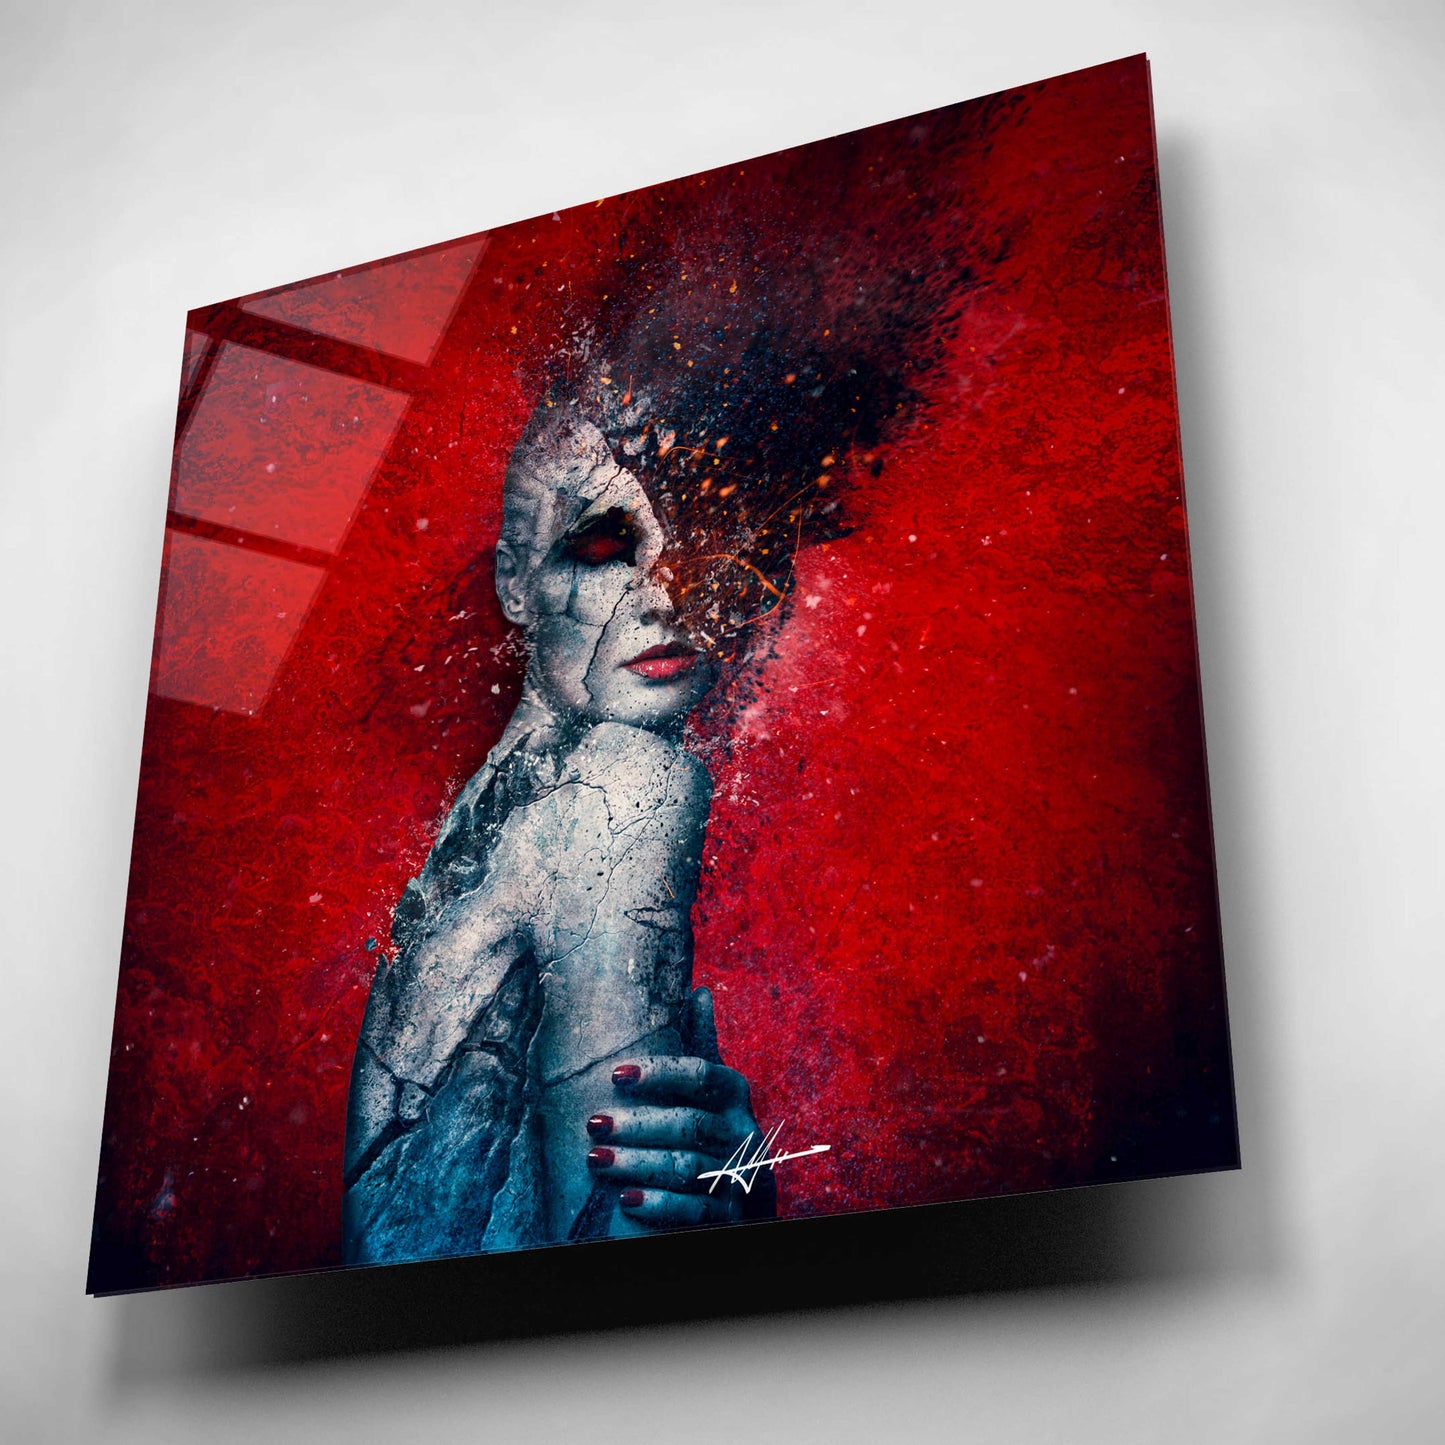 Epic Art 'Indifference' by Mario Sanchez Nevado, Acrylic Glass Wall Art,12x12